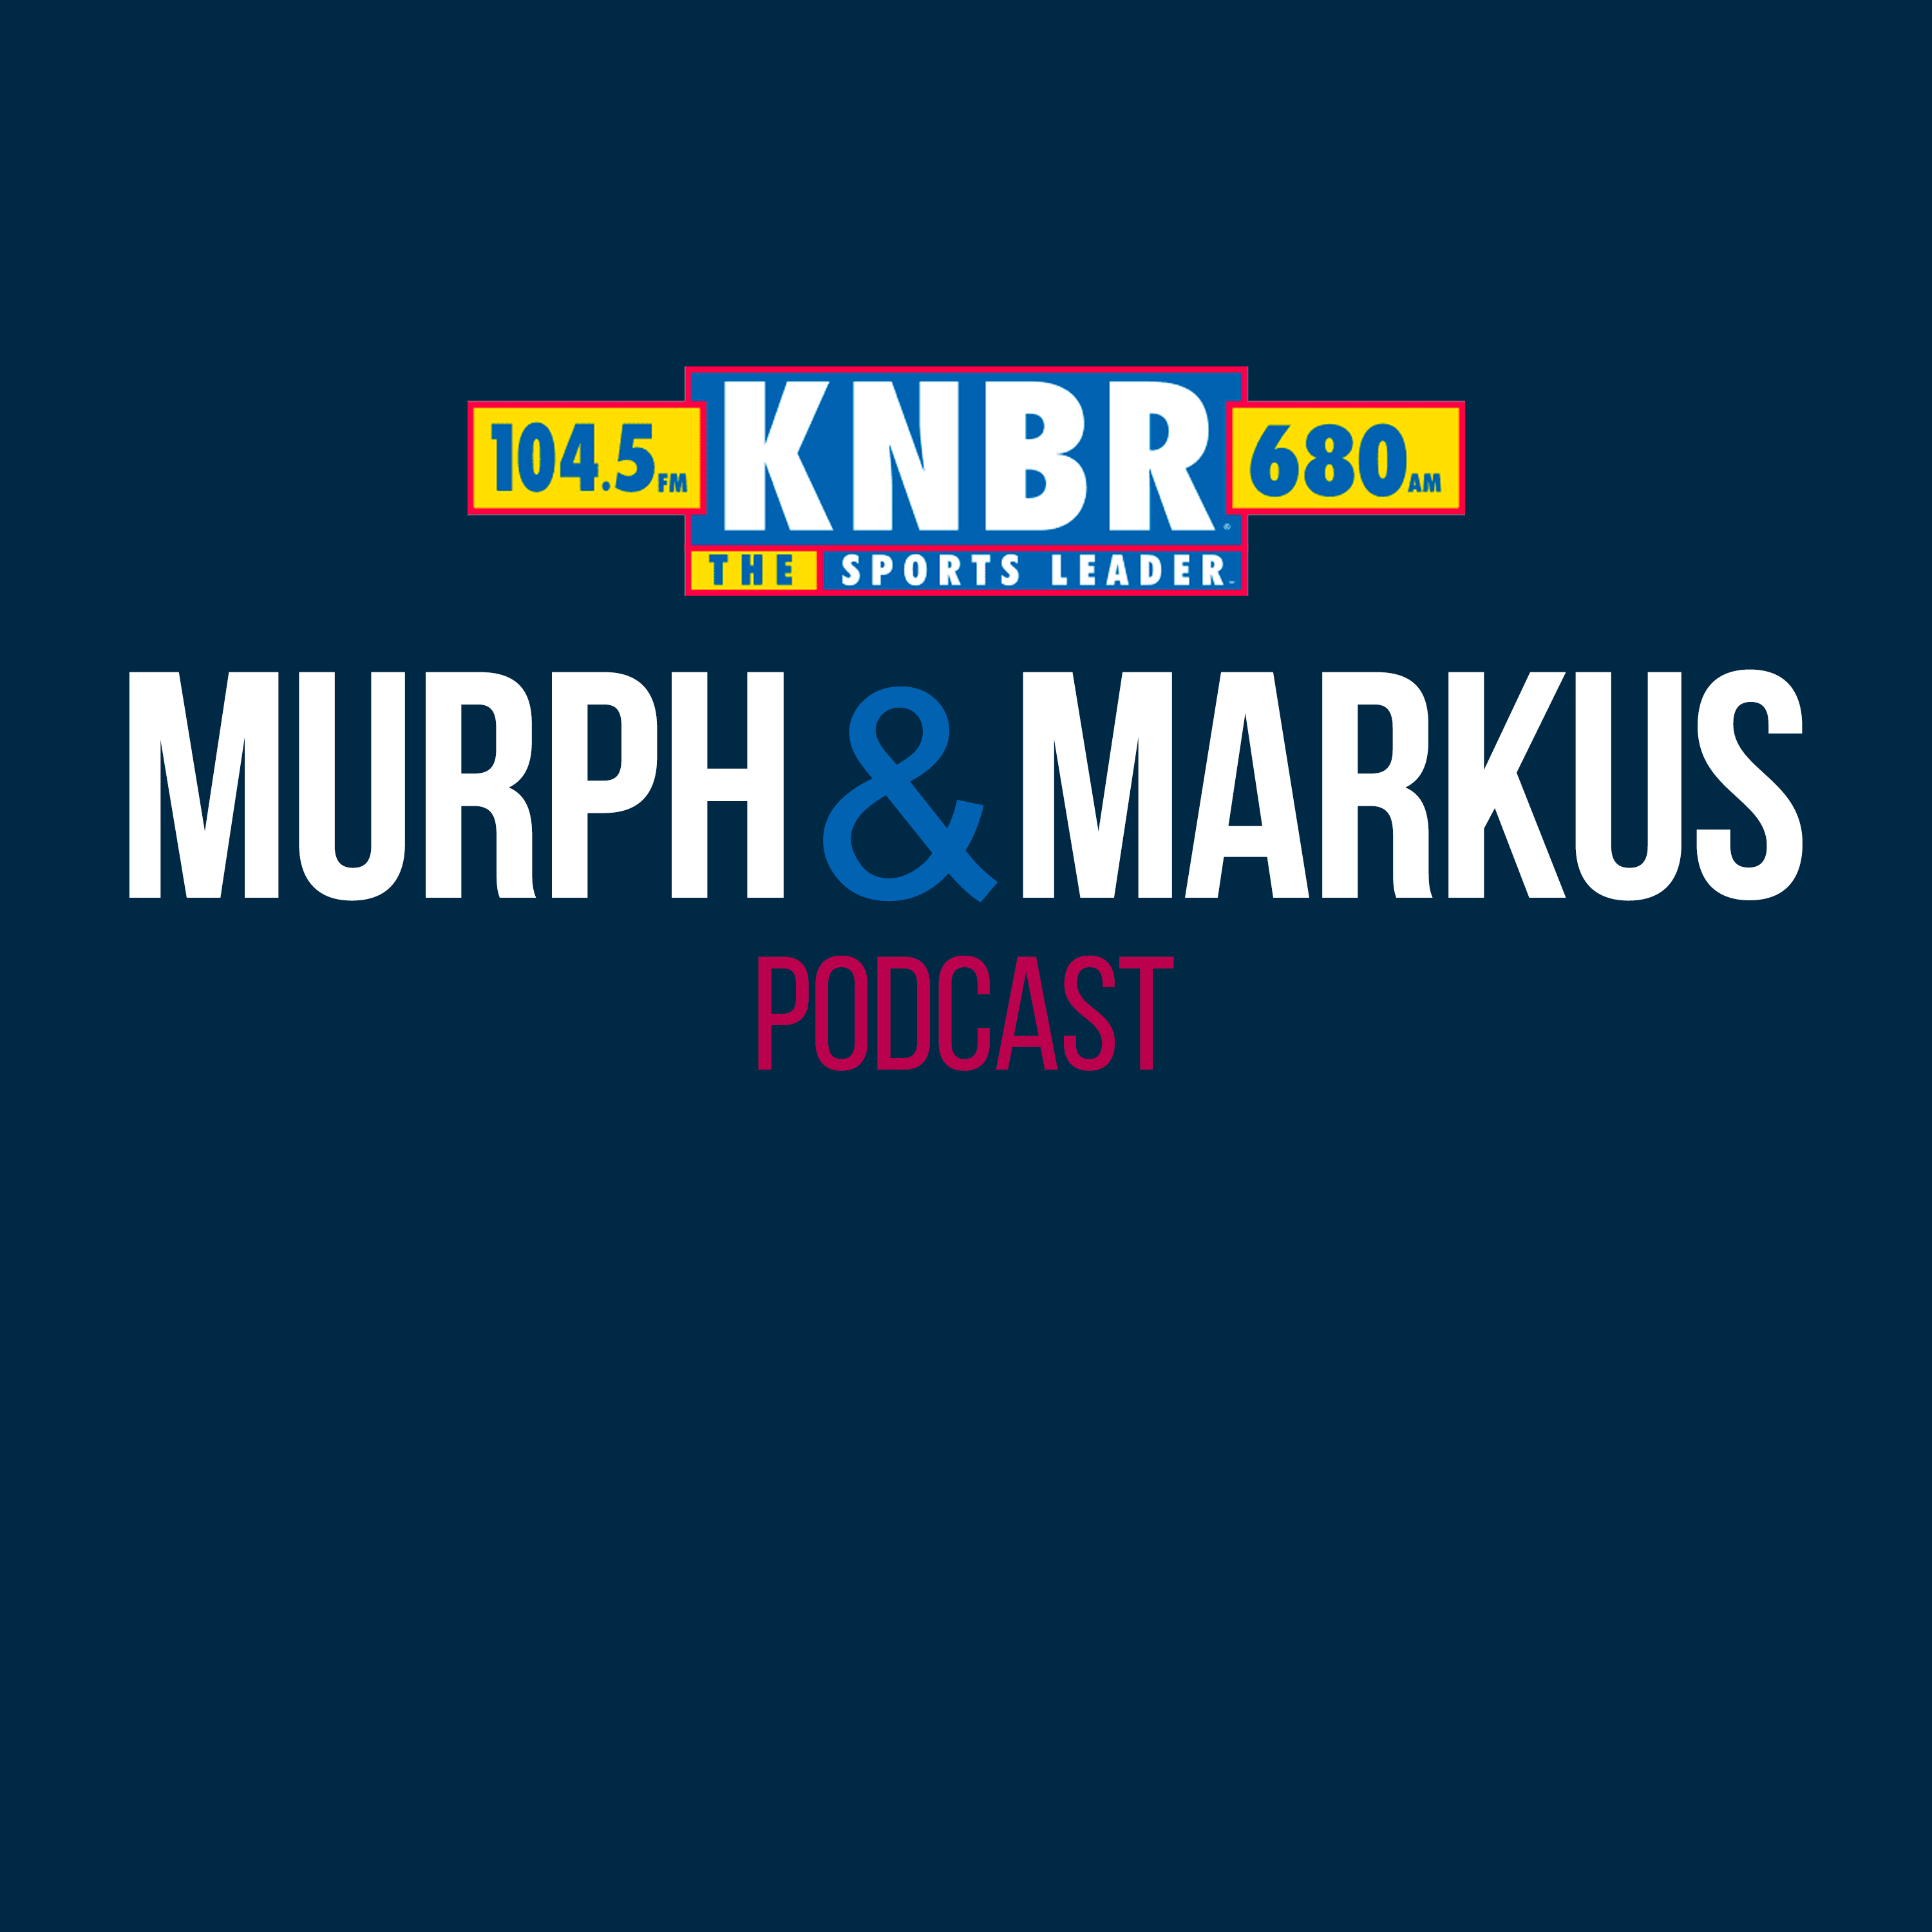 7-11 Joe Ritzo talked to Murph and Markus about Ramos making the All-Star team, and rehab starts from Cobb and Ray